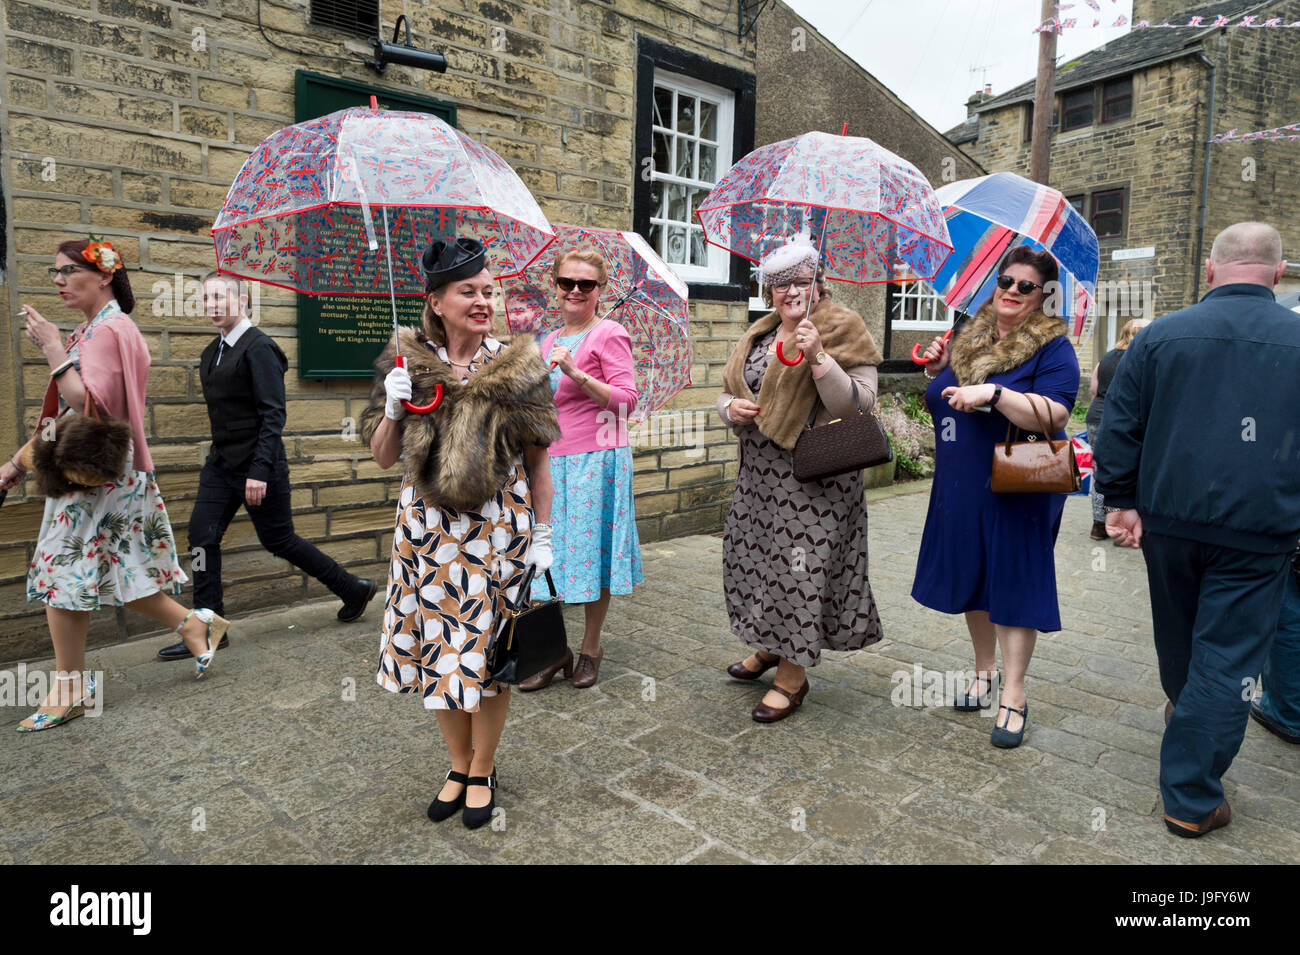 1940s Weekend in Haworth village, West Yorkshire, Regno Unito Foto Stock